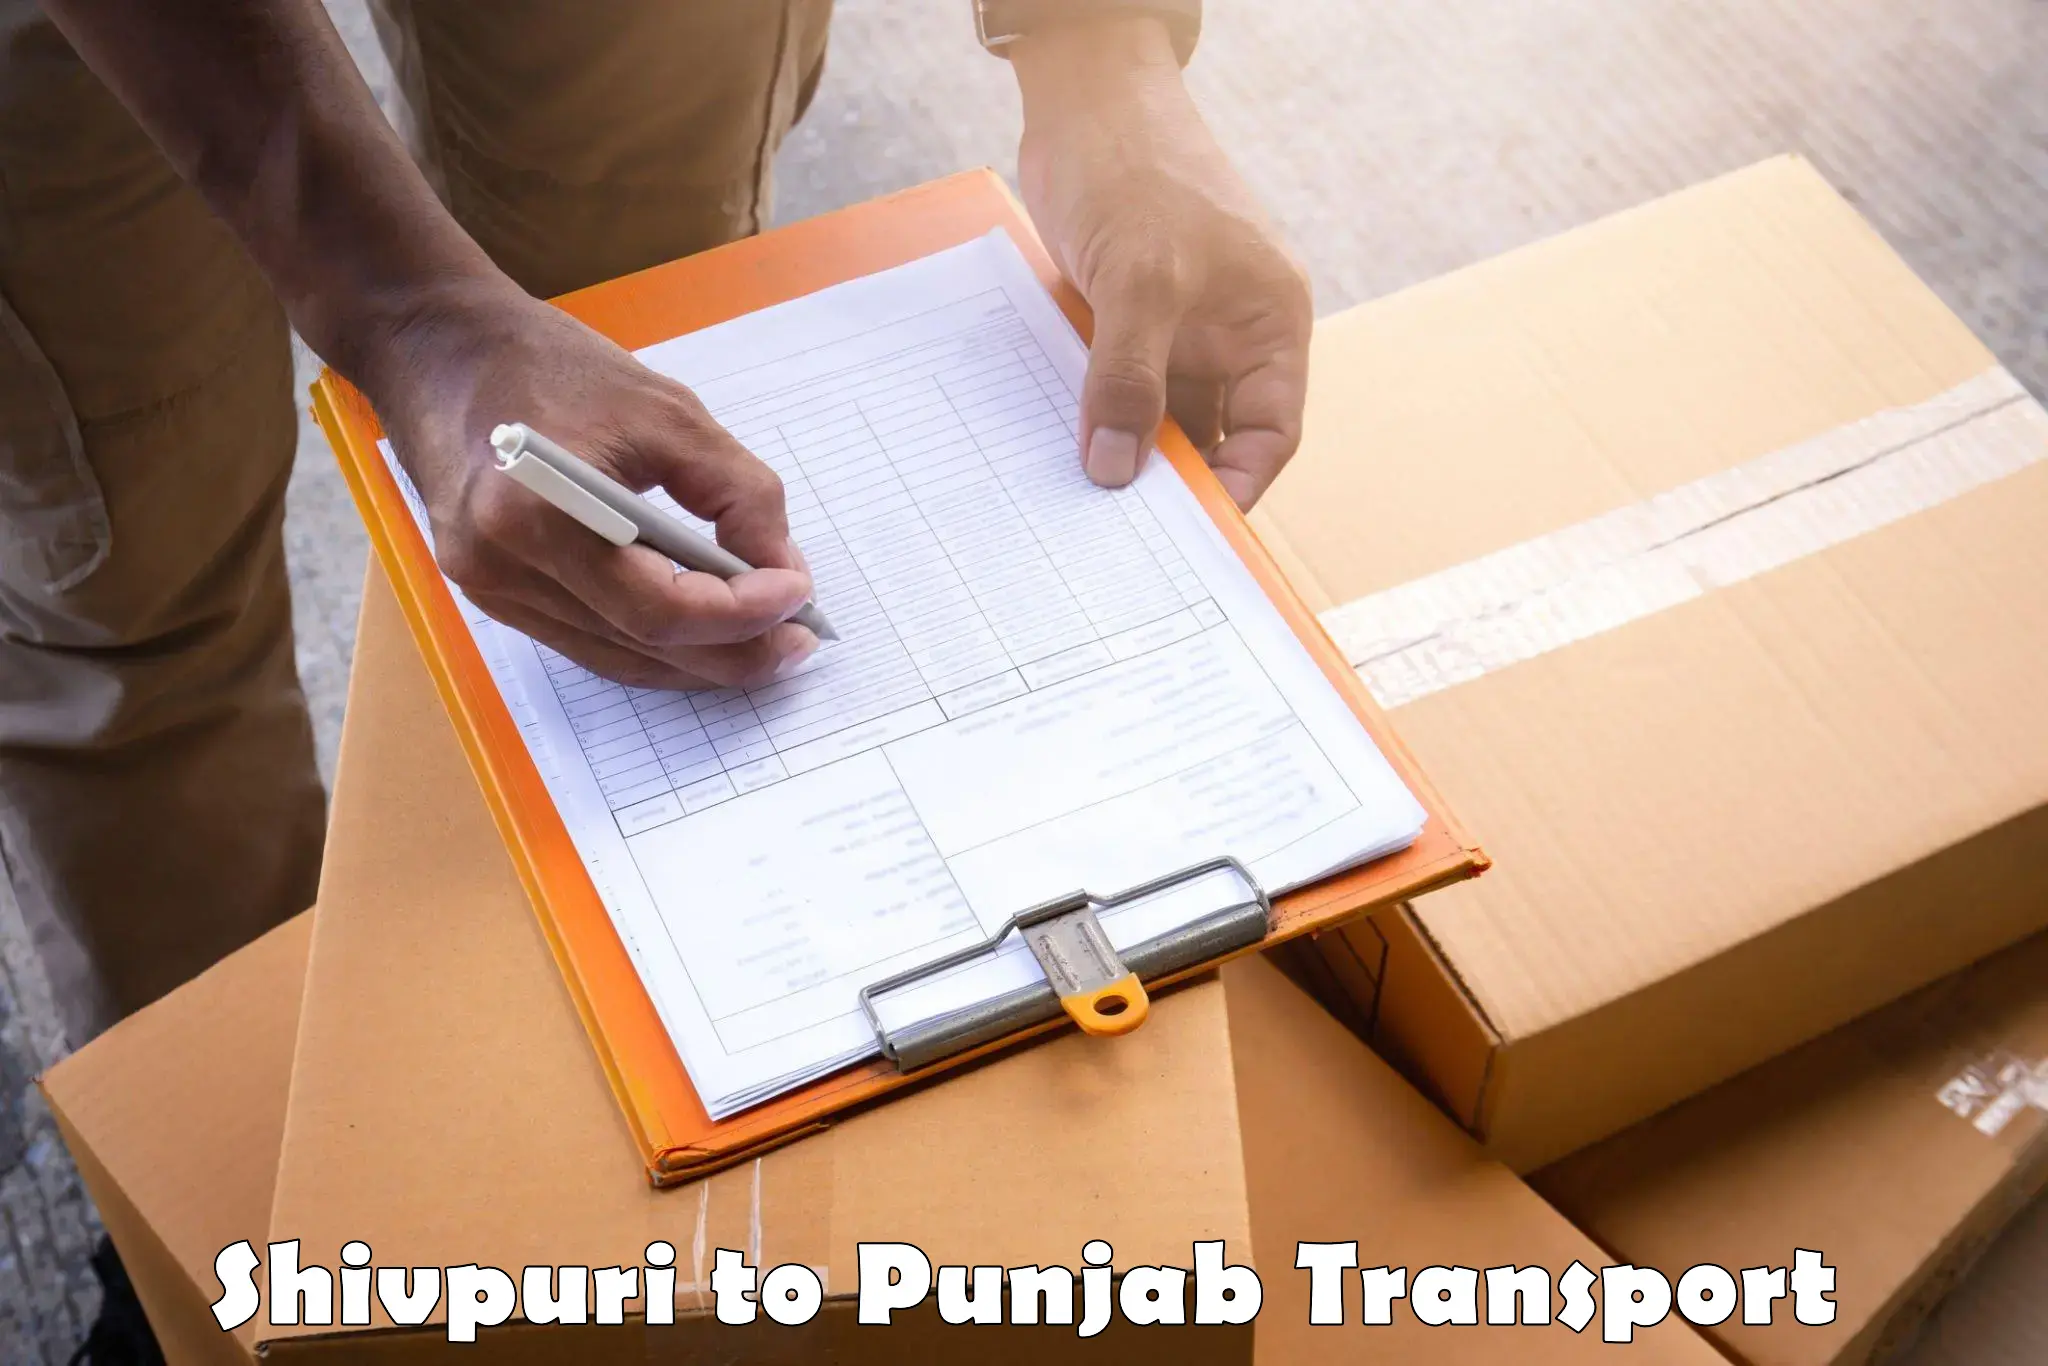 Container transport service Shivpuri to Amritsar